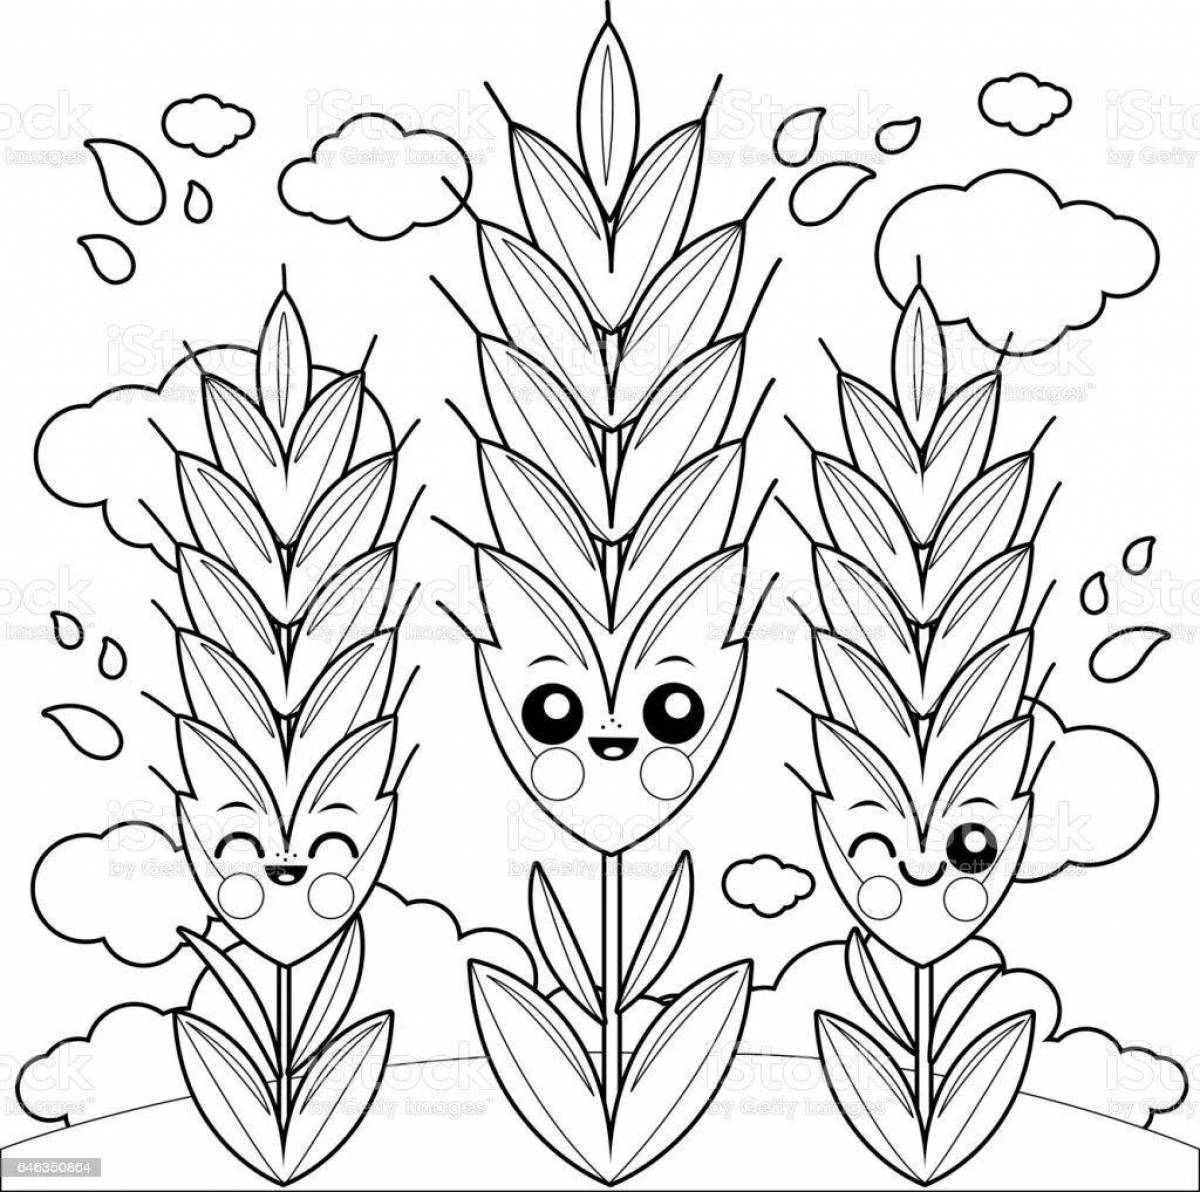 Delightful spikelet coloring book for kids